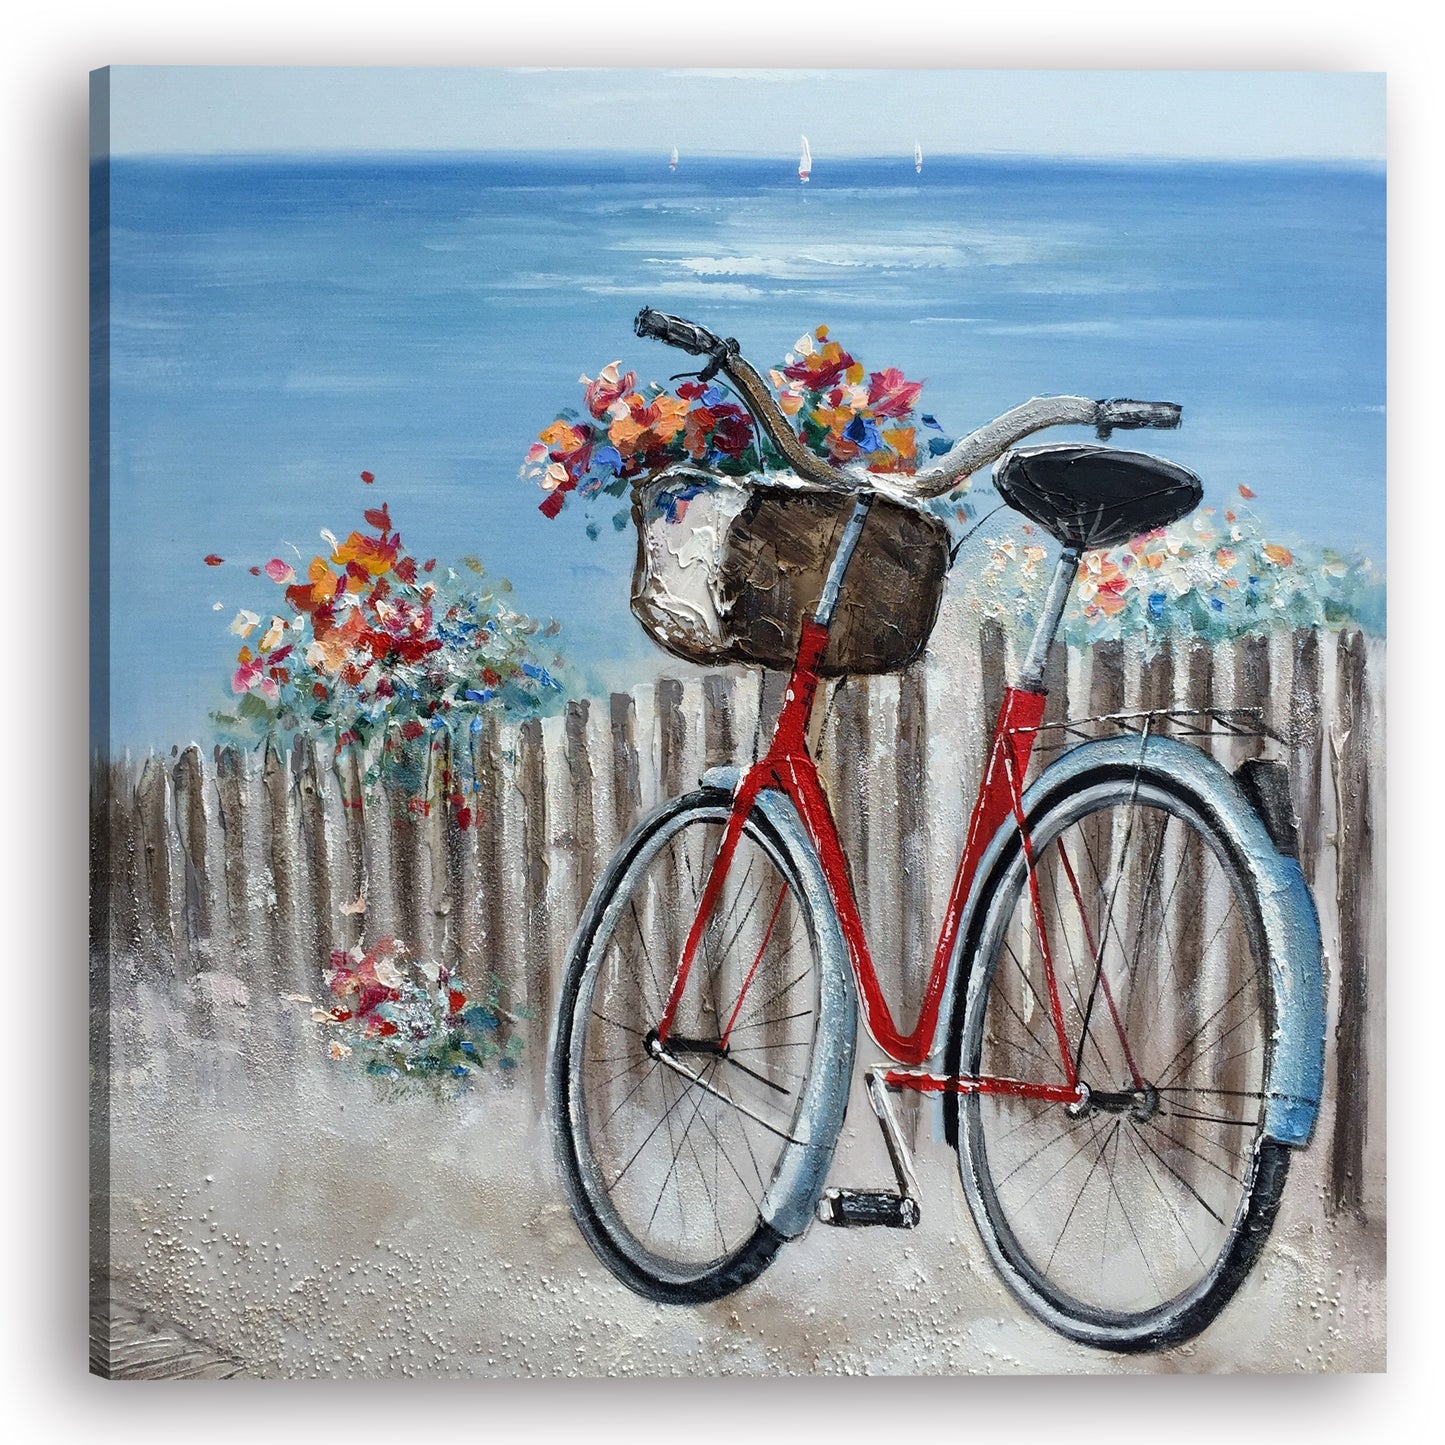 "Flowers & Bicycles on Coastal" Hand painted on Wrapped Canvas